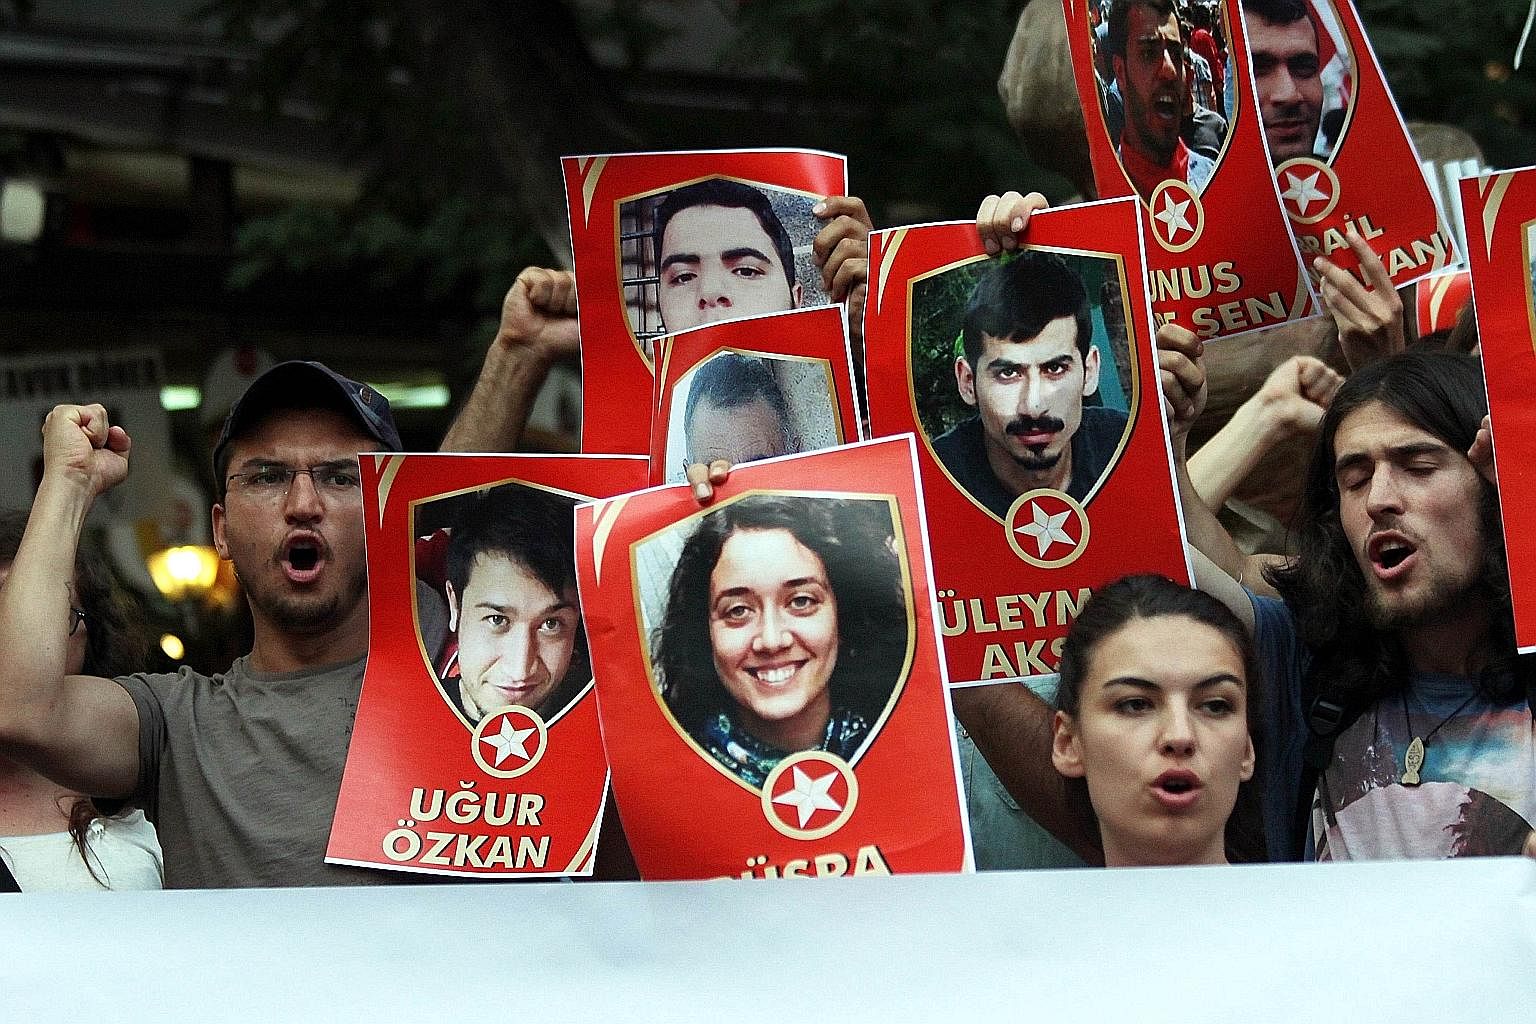 Demonstrators in Ankara displaying pictures of terror victims on Monday as they chanted slogans denouncing a suicide bombing in the Turkish border town of Suruc on July 20 that killed 32 people.